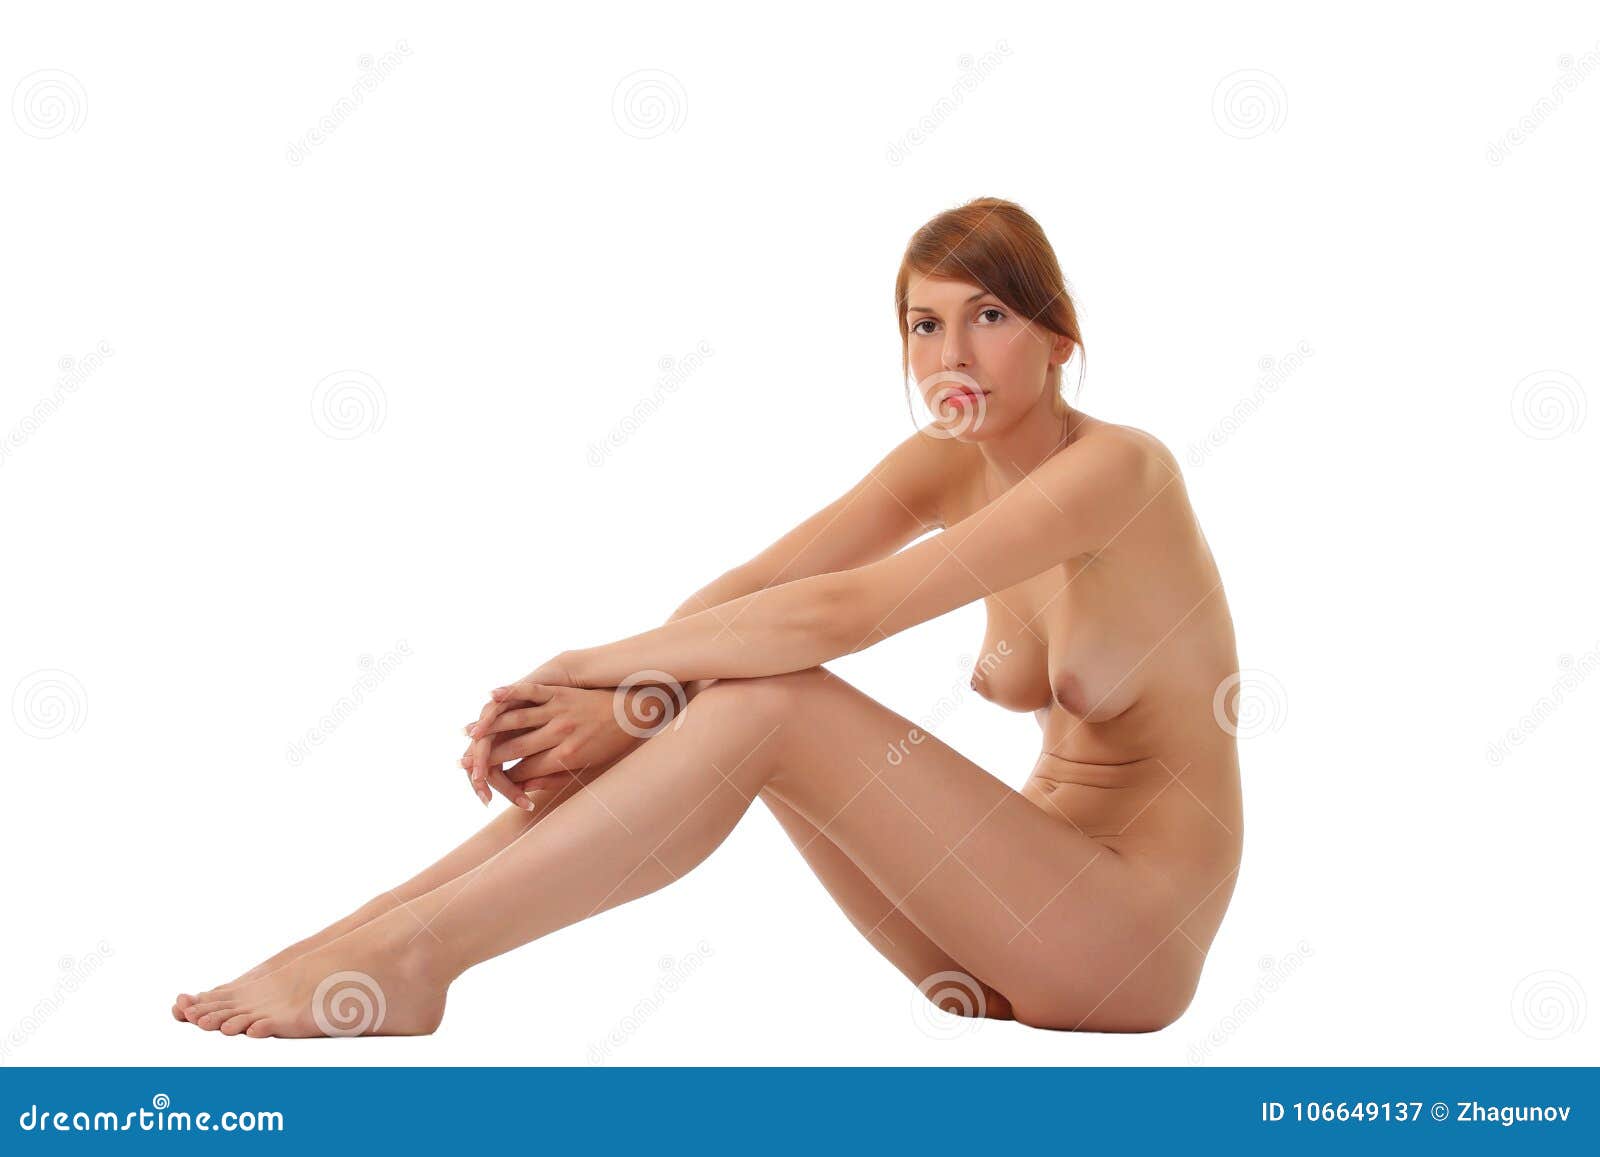 Nude Photos Of Naked Women